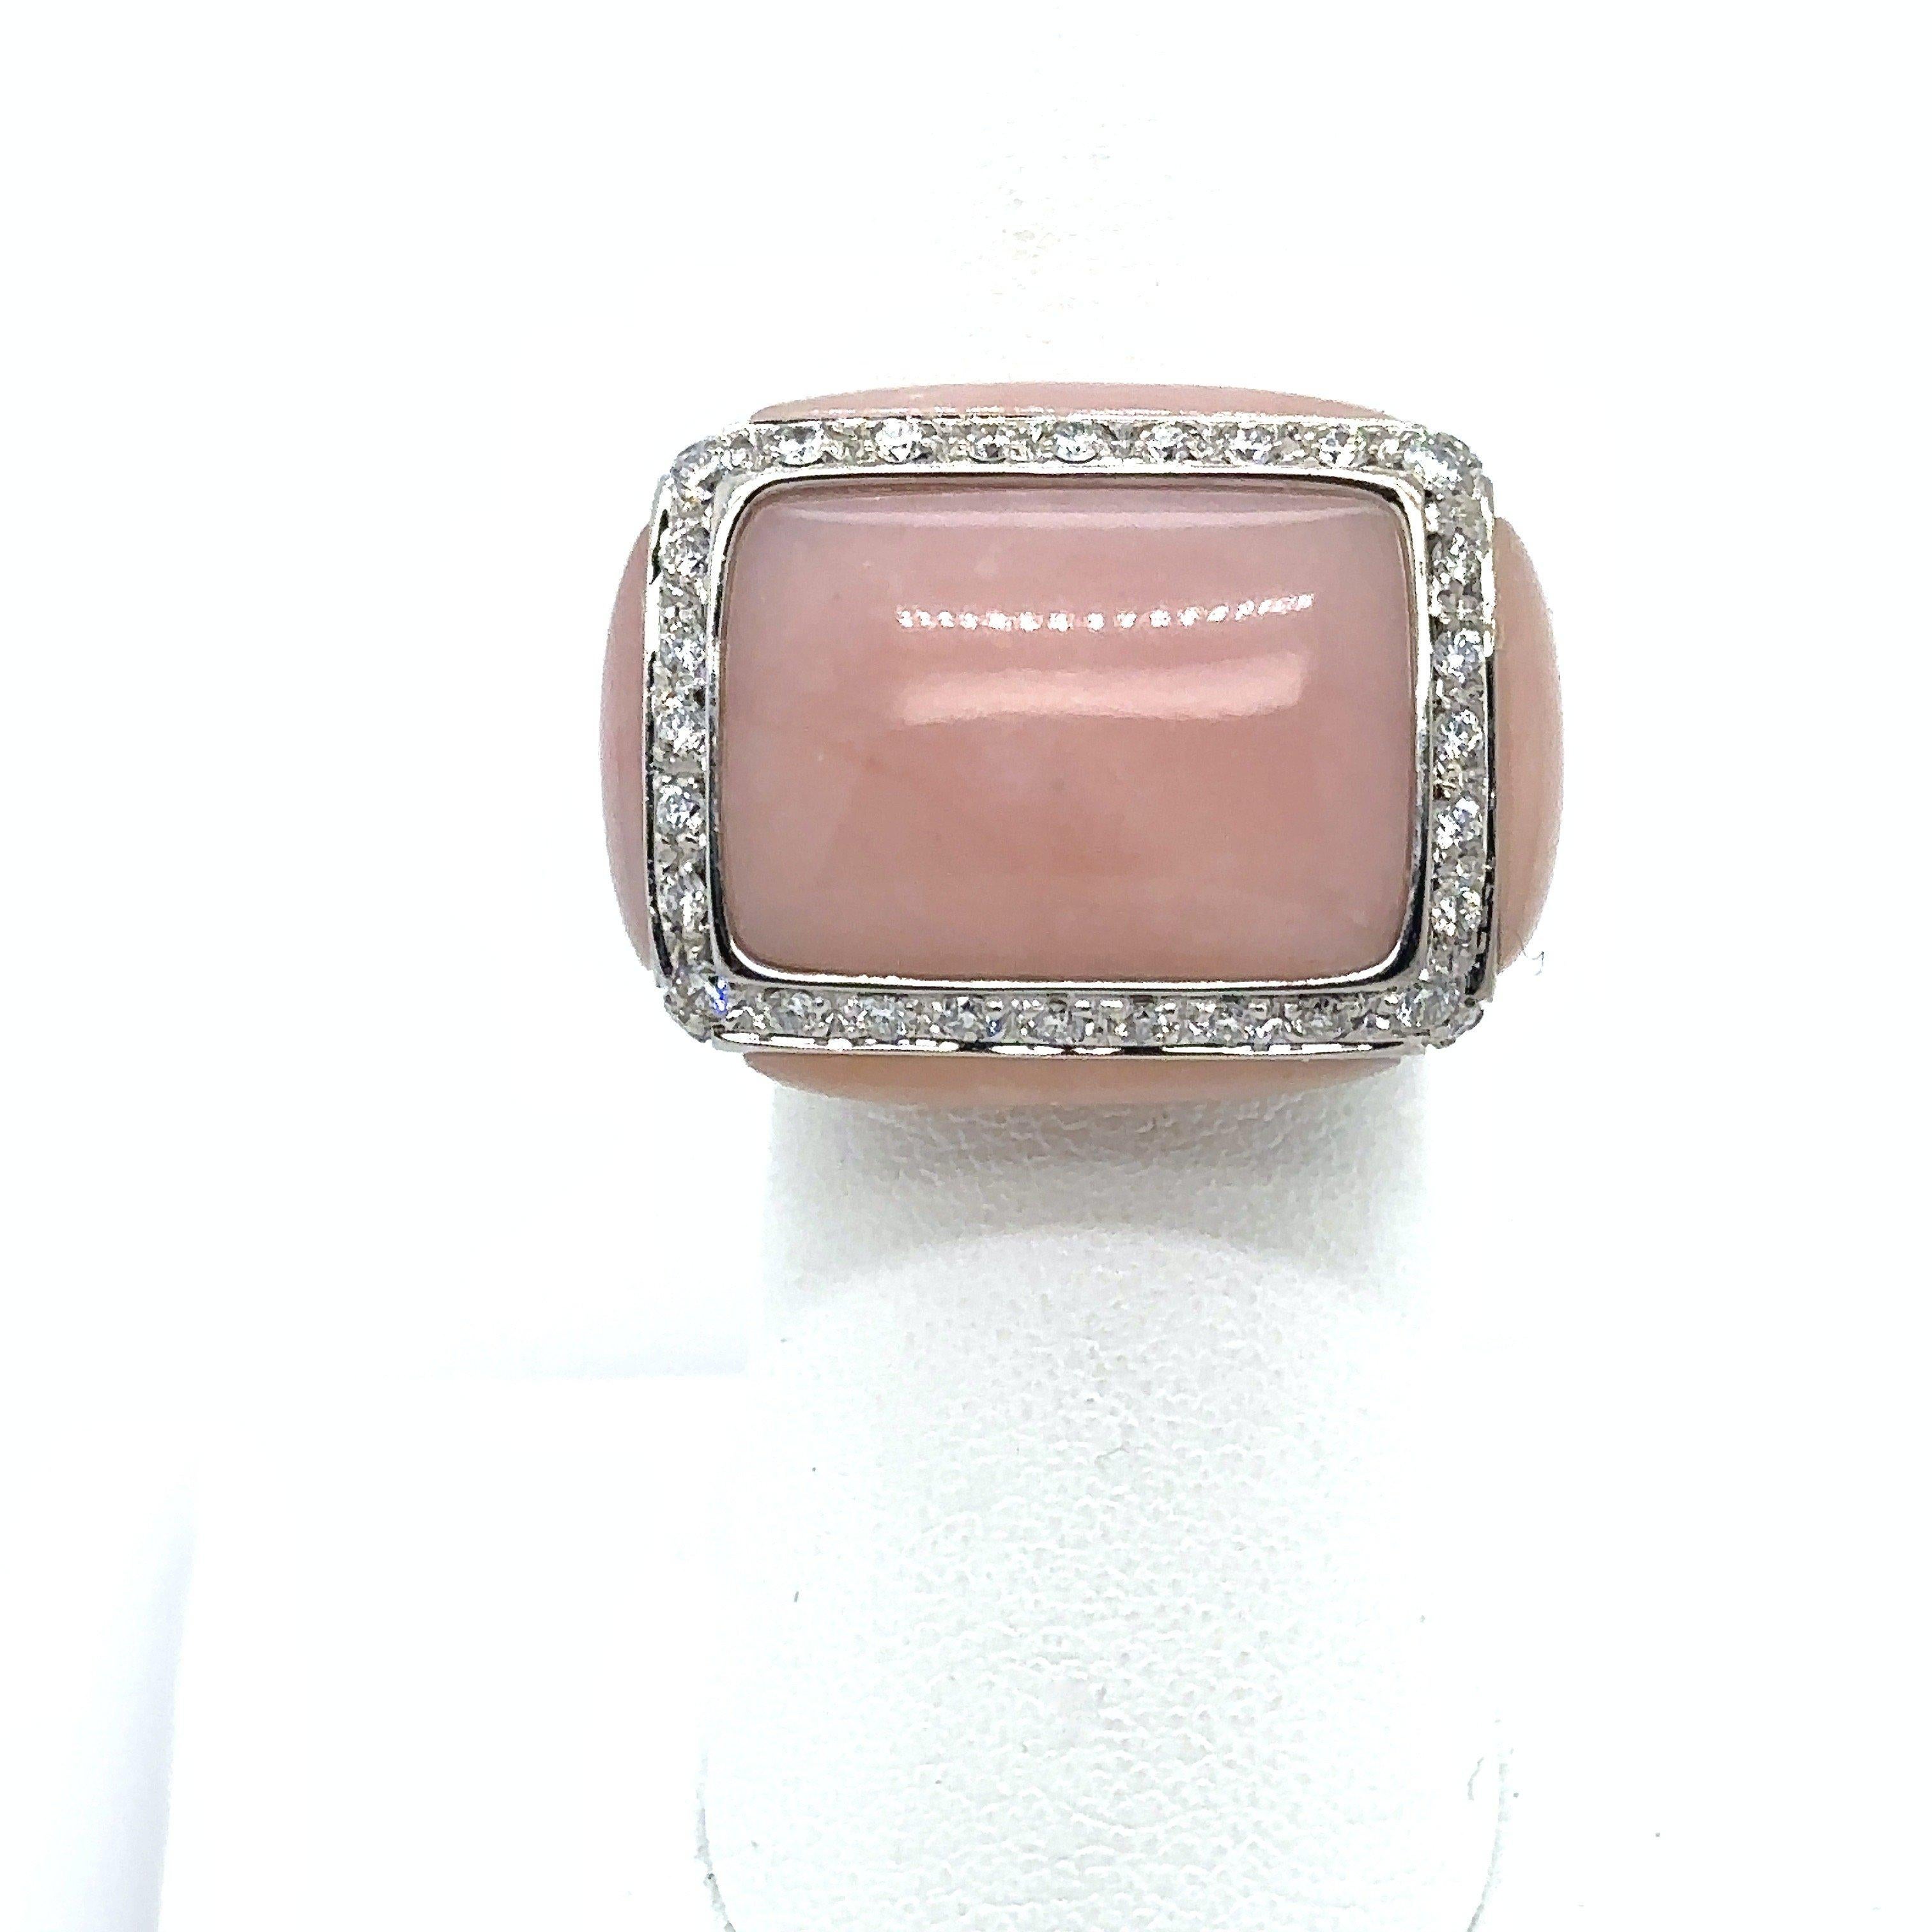 Oro Trend Baby Pink Coral and Diamond Cocktail Ring. This baby pink coral and diamond cocktail ring was crafted by Italian designer Oro Trend and set in 18KT white gold. The rectangular-shaped ring is framed by round diamonds along the top and the